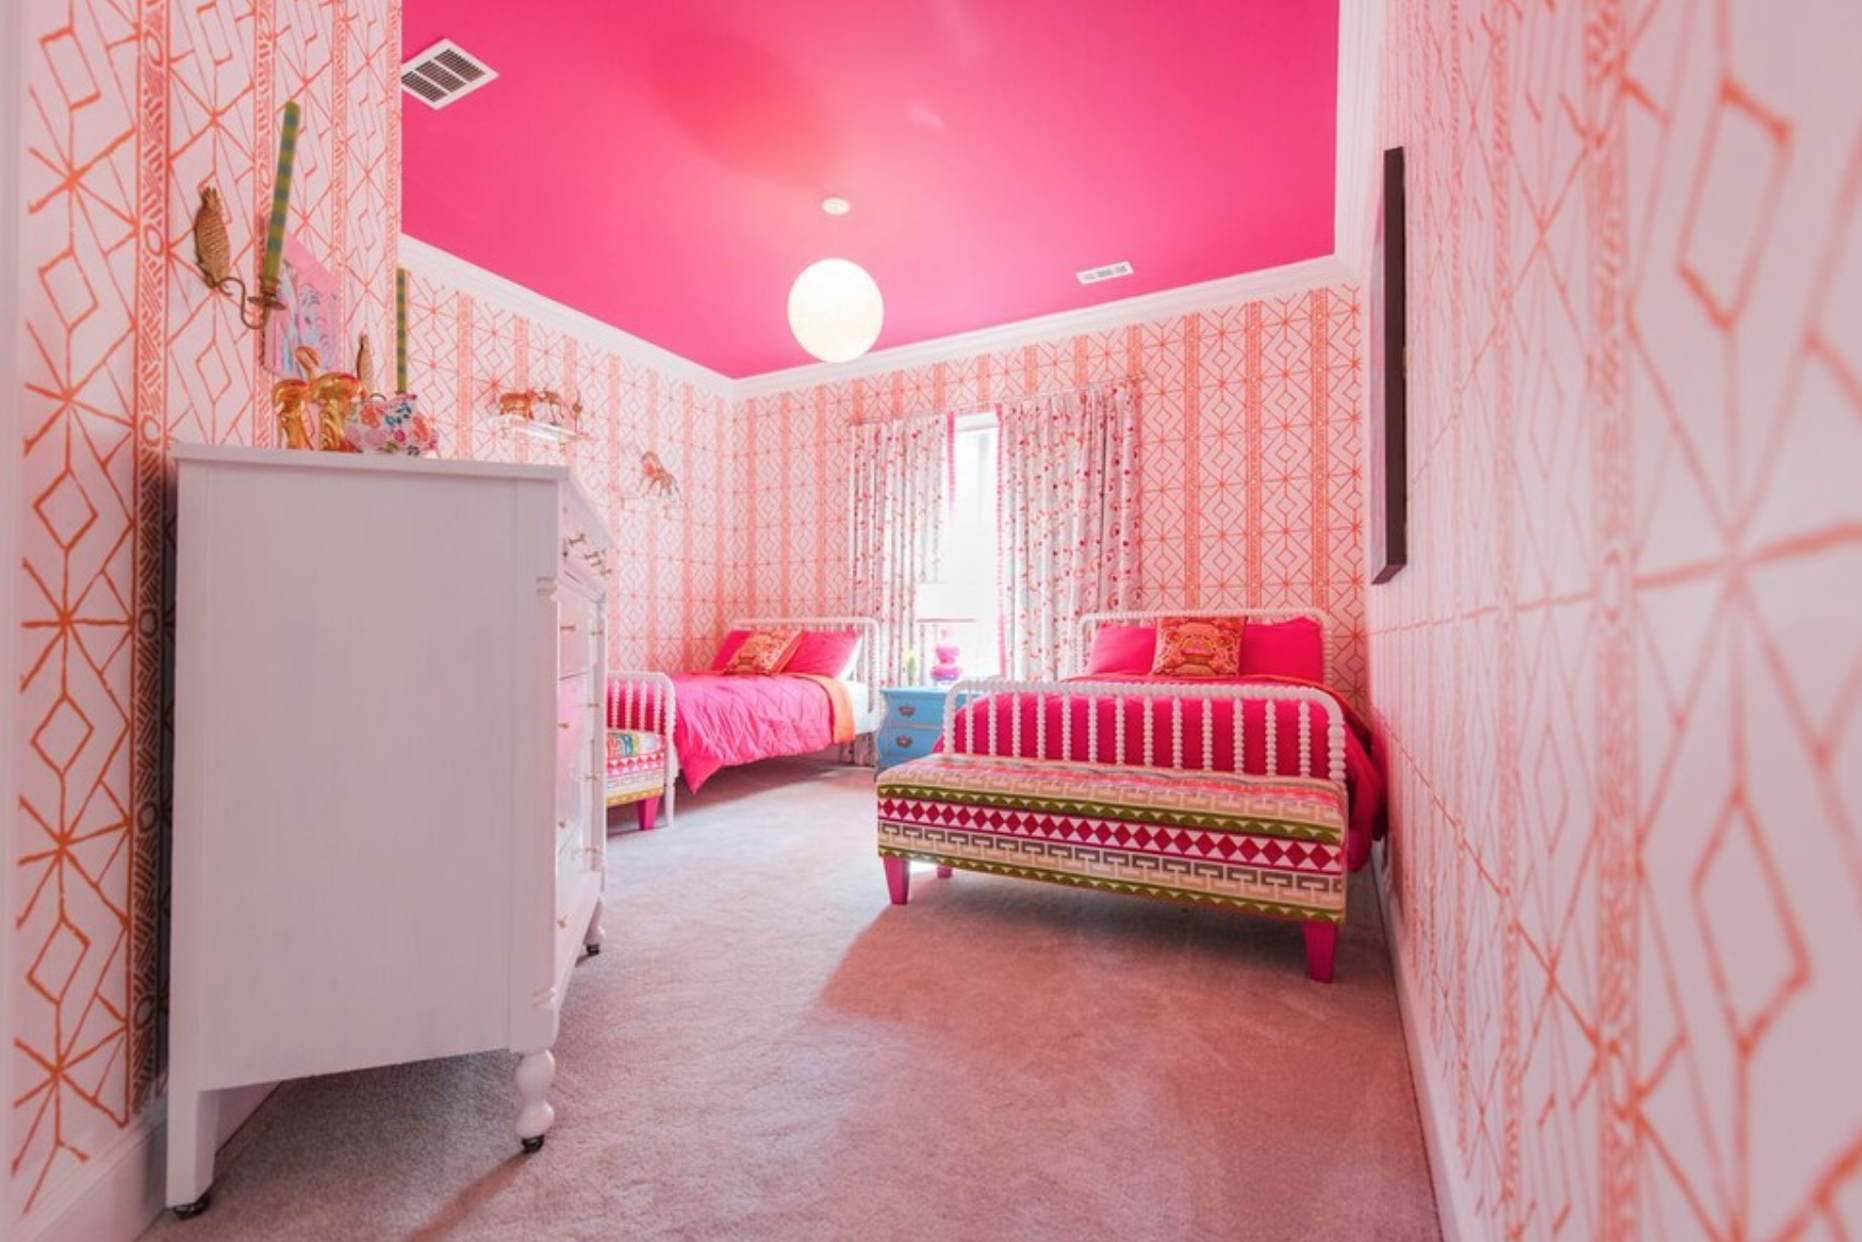 Dwell-Chic-Pink-Paradise-Bedroom-Angle-View.png